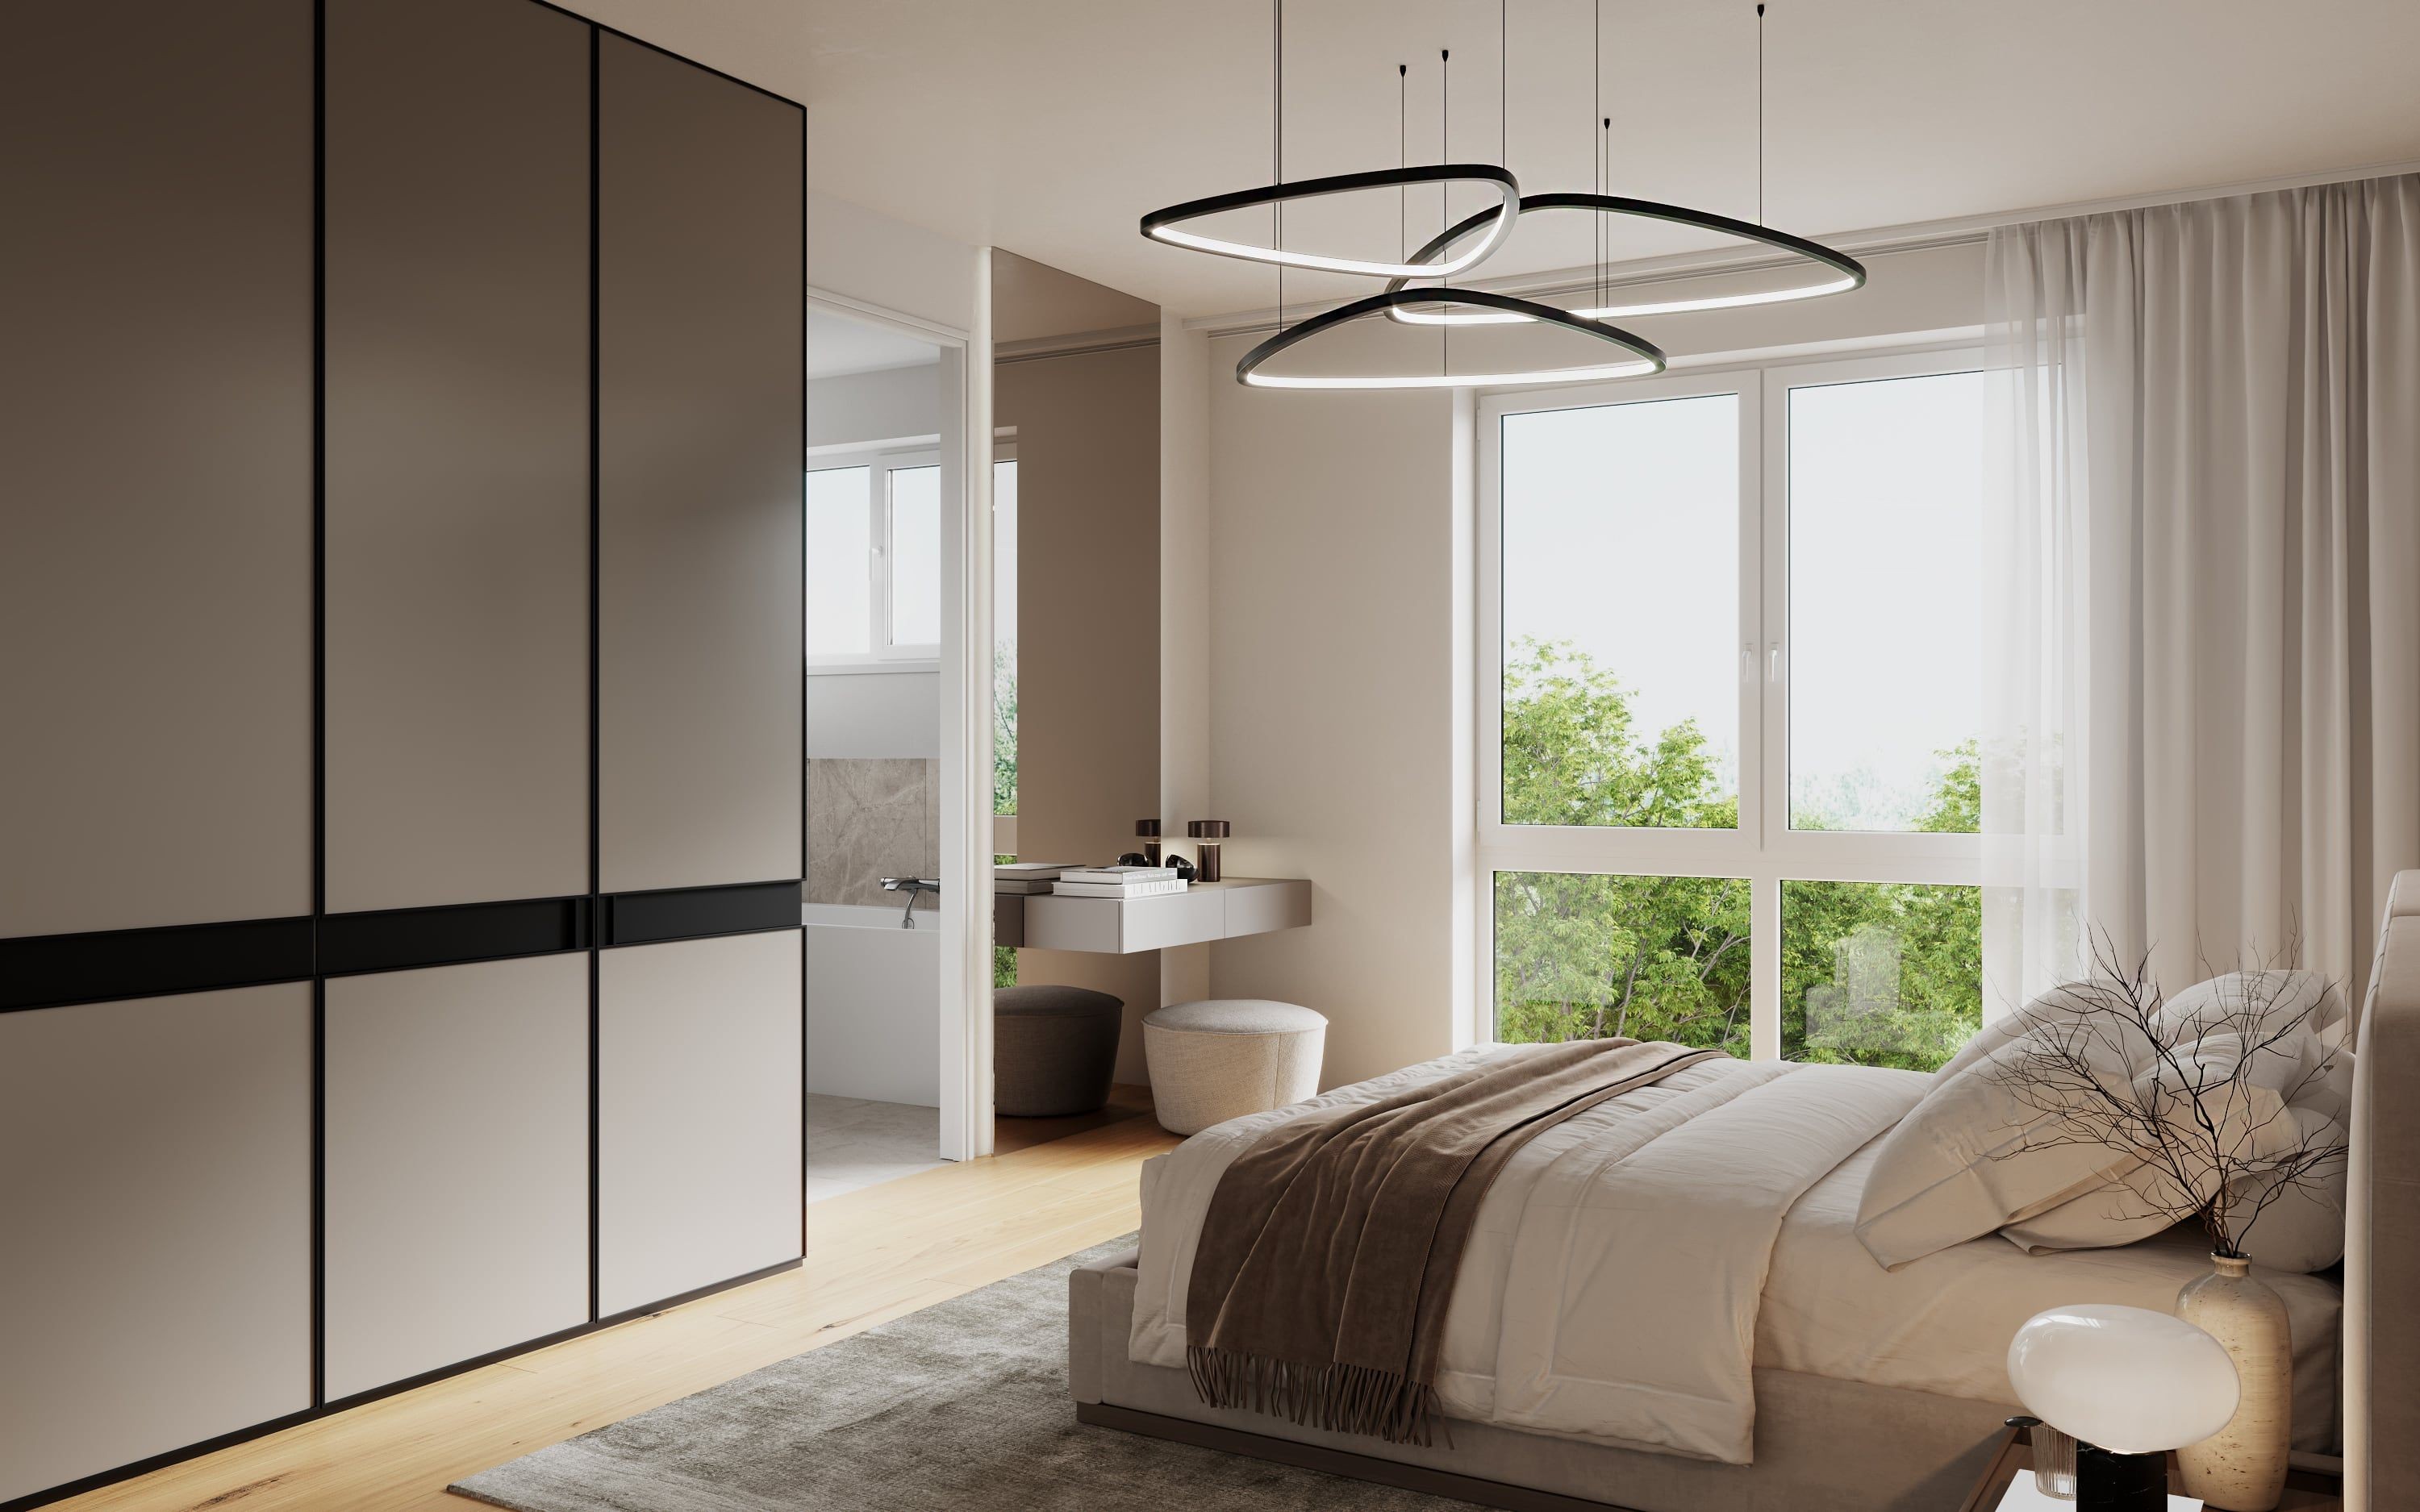 3D Interior Visualization of master bedroom with access to master bathroom in apartment in new house in Othmarscher Kirchenweg Hamburg, Germany